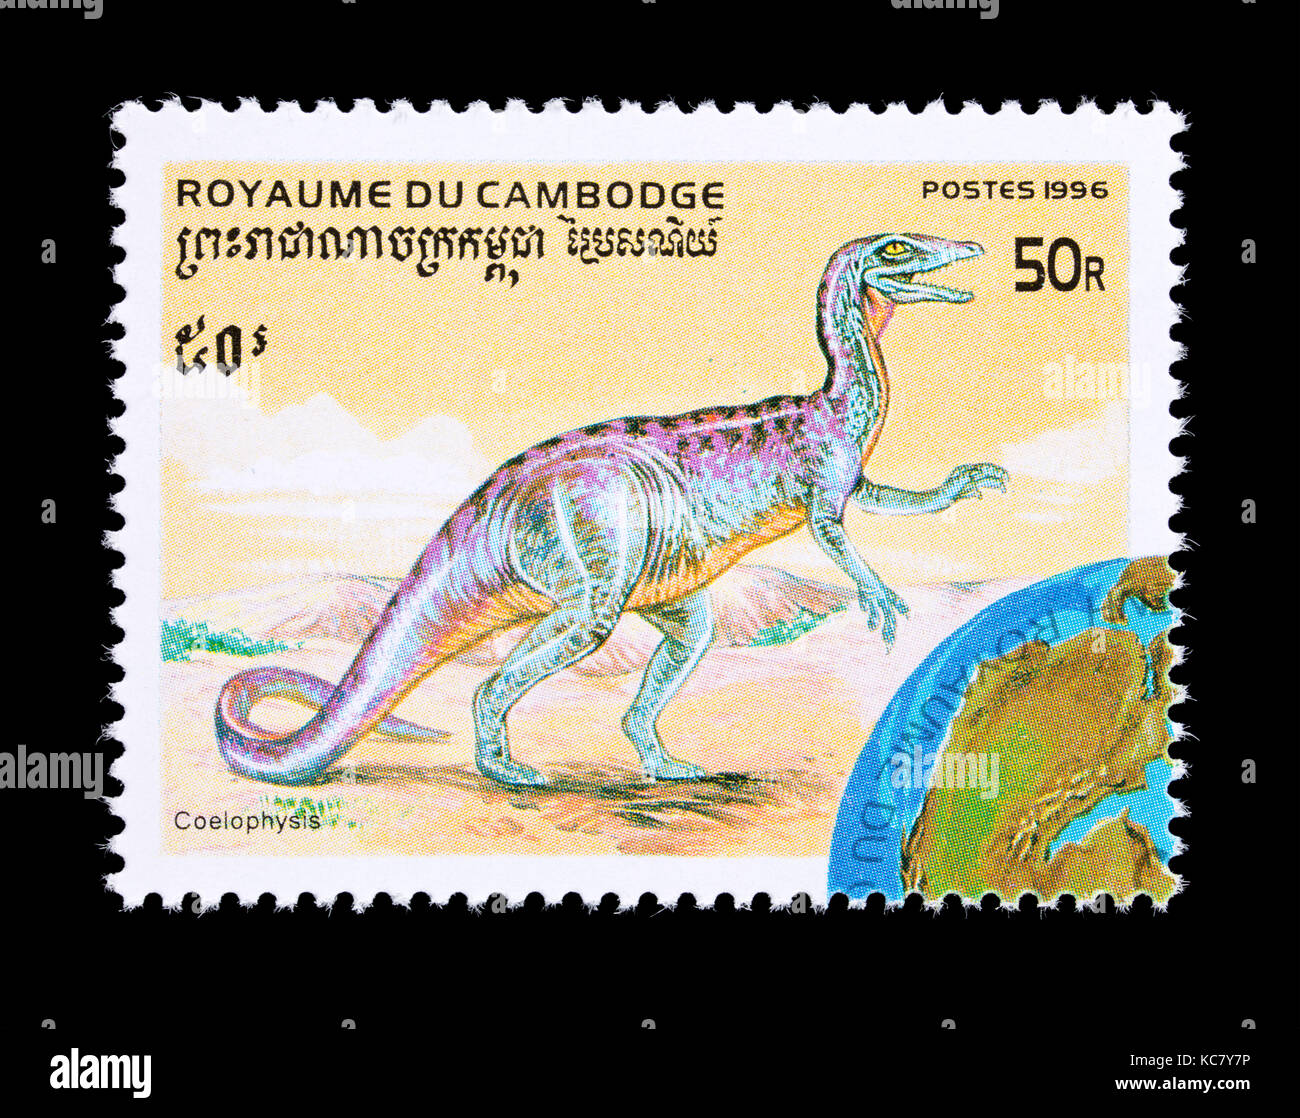 Postage stamp from Cambodia depicting a Coelophysis dinosaur Stock Photo